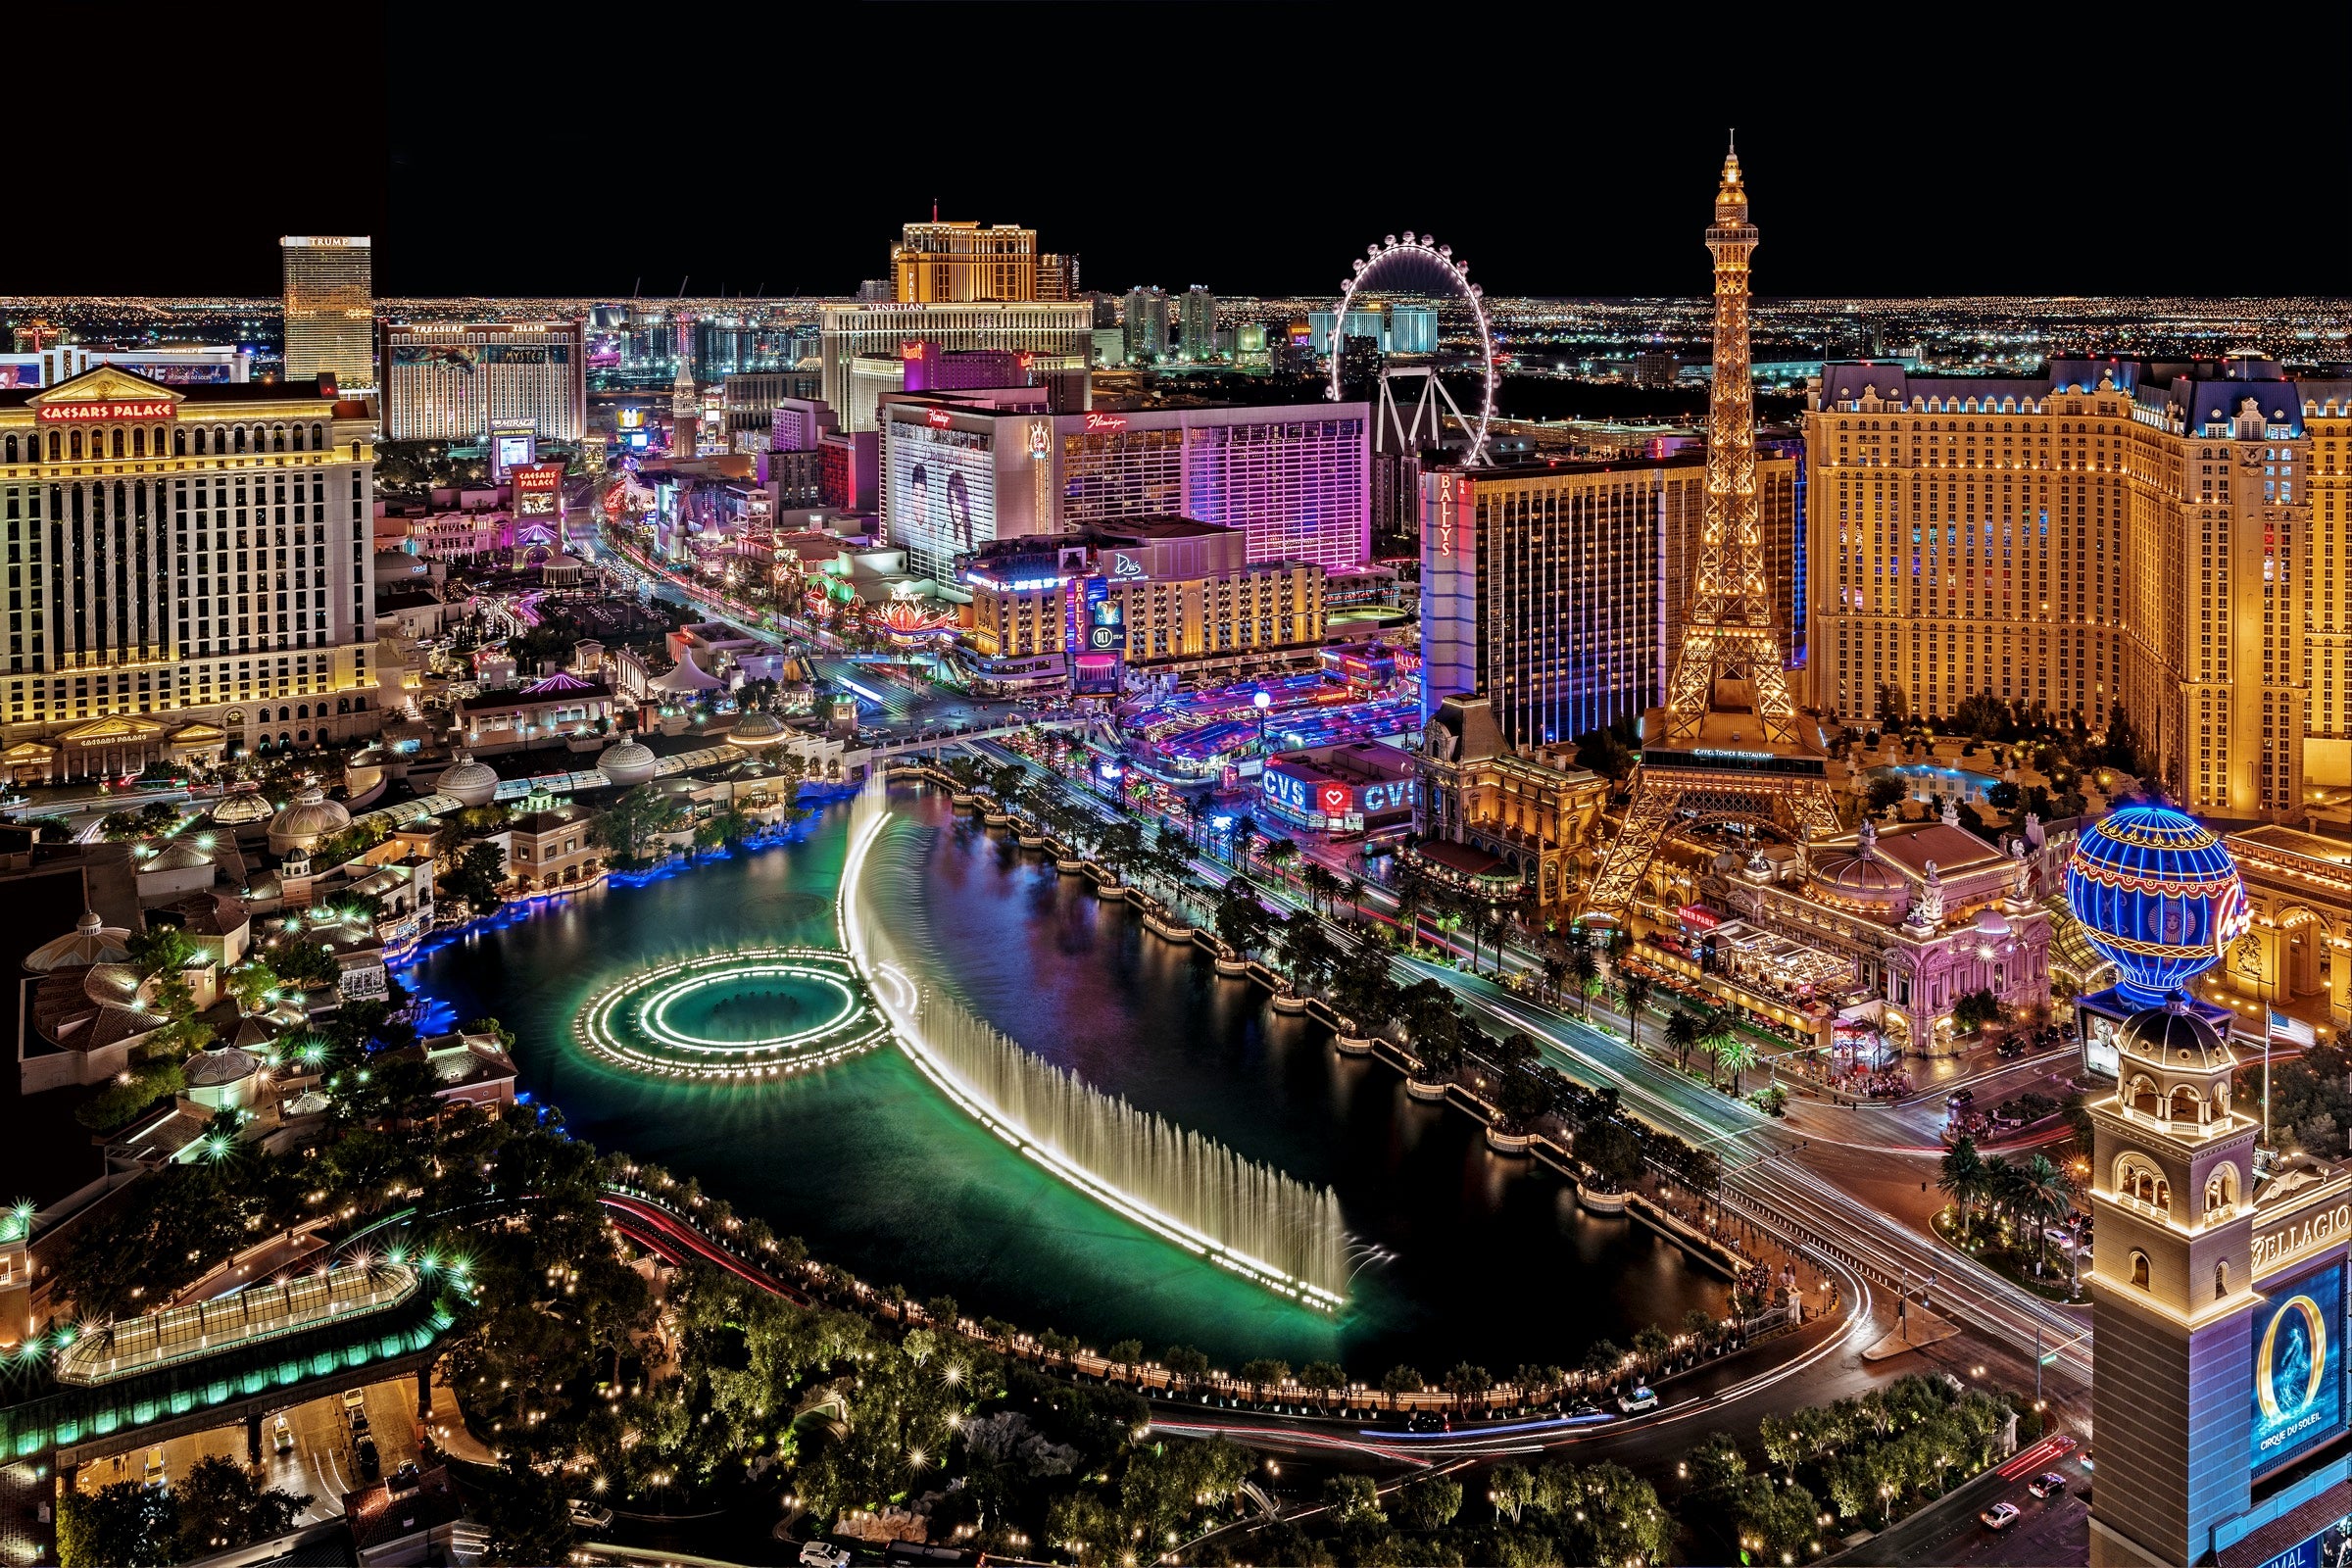 Fly nonstop to Vegas from Denver, LA and Minneapolis for as low as $38 round-trip